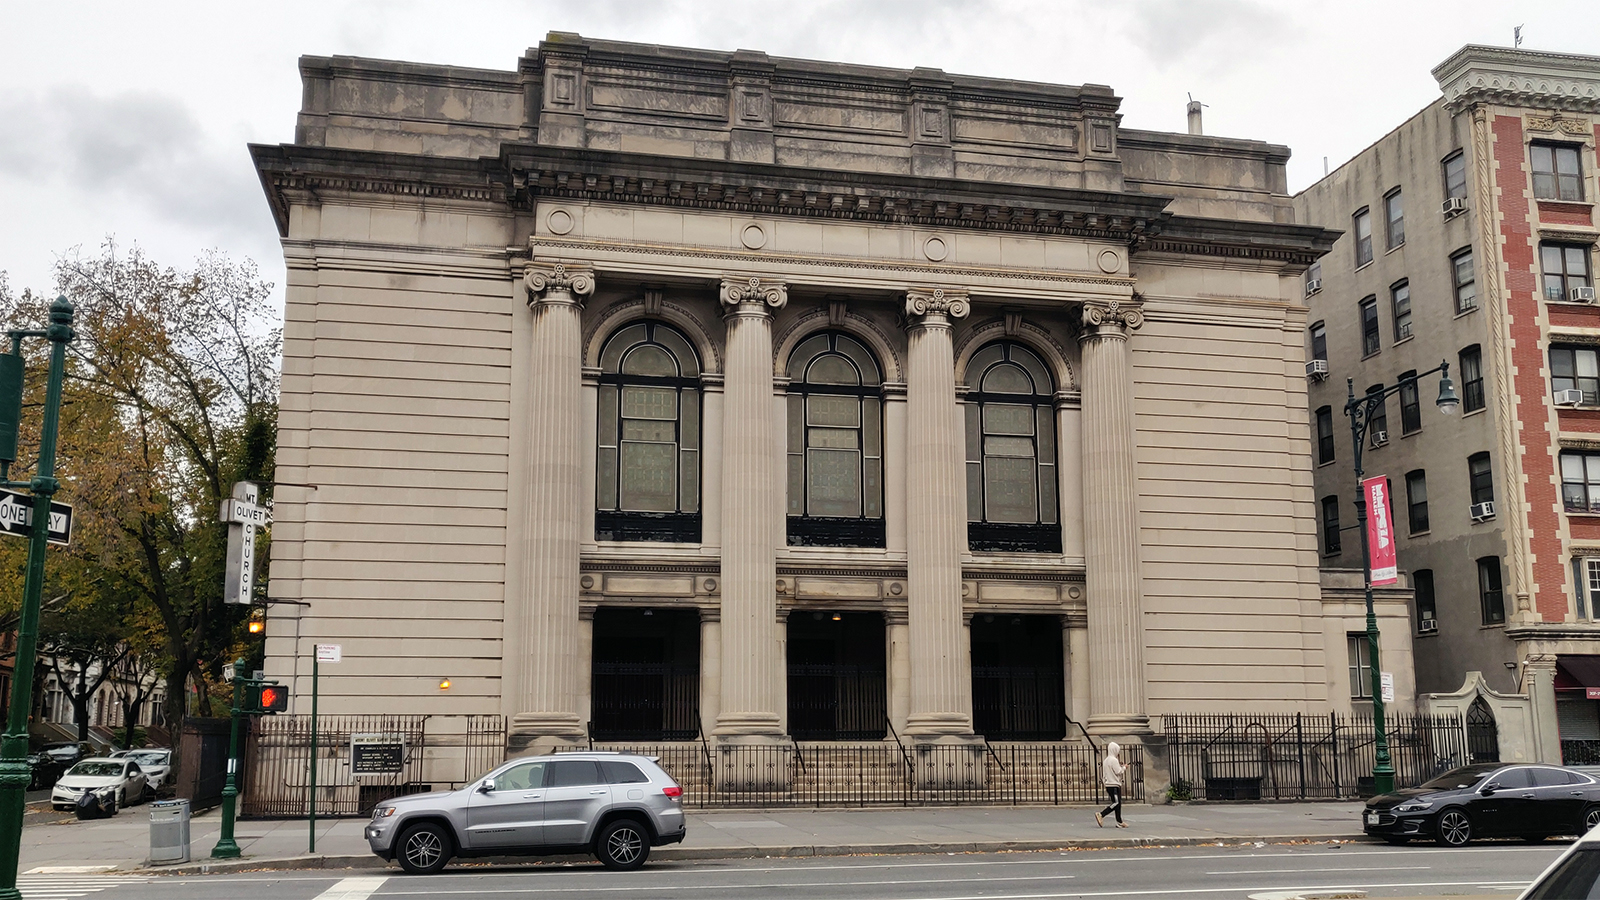 The former Temple Israel is now Mount Olivet Baptist Church, seen on Nov. 2, 2021, during a walking tour in Harlem. RNS photo by Nidhi Upadhyaya